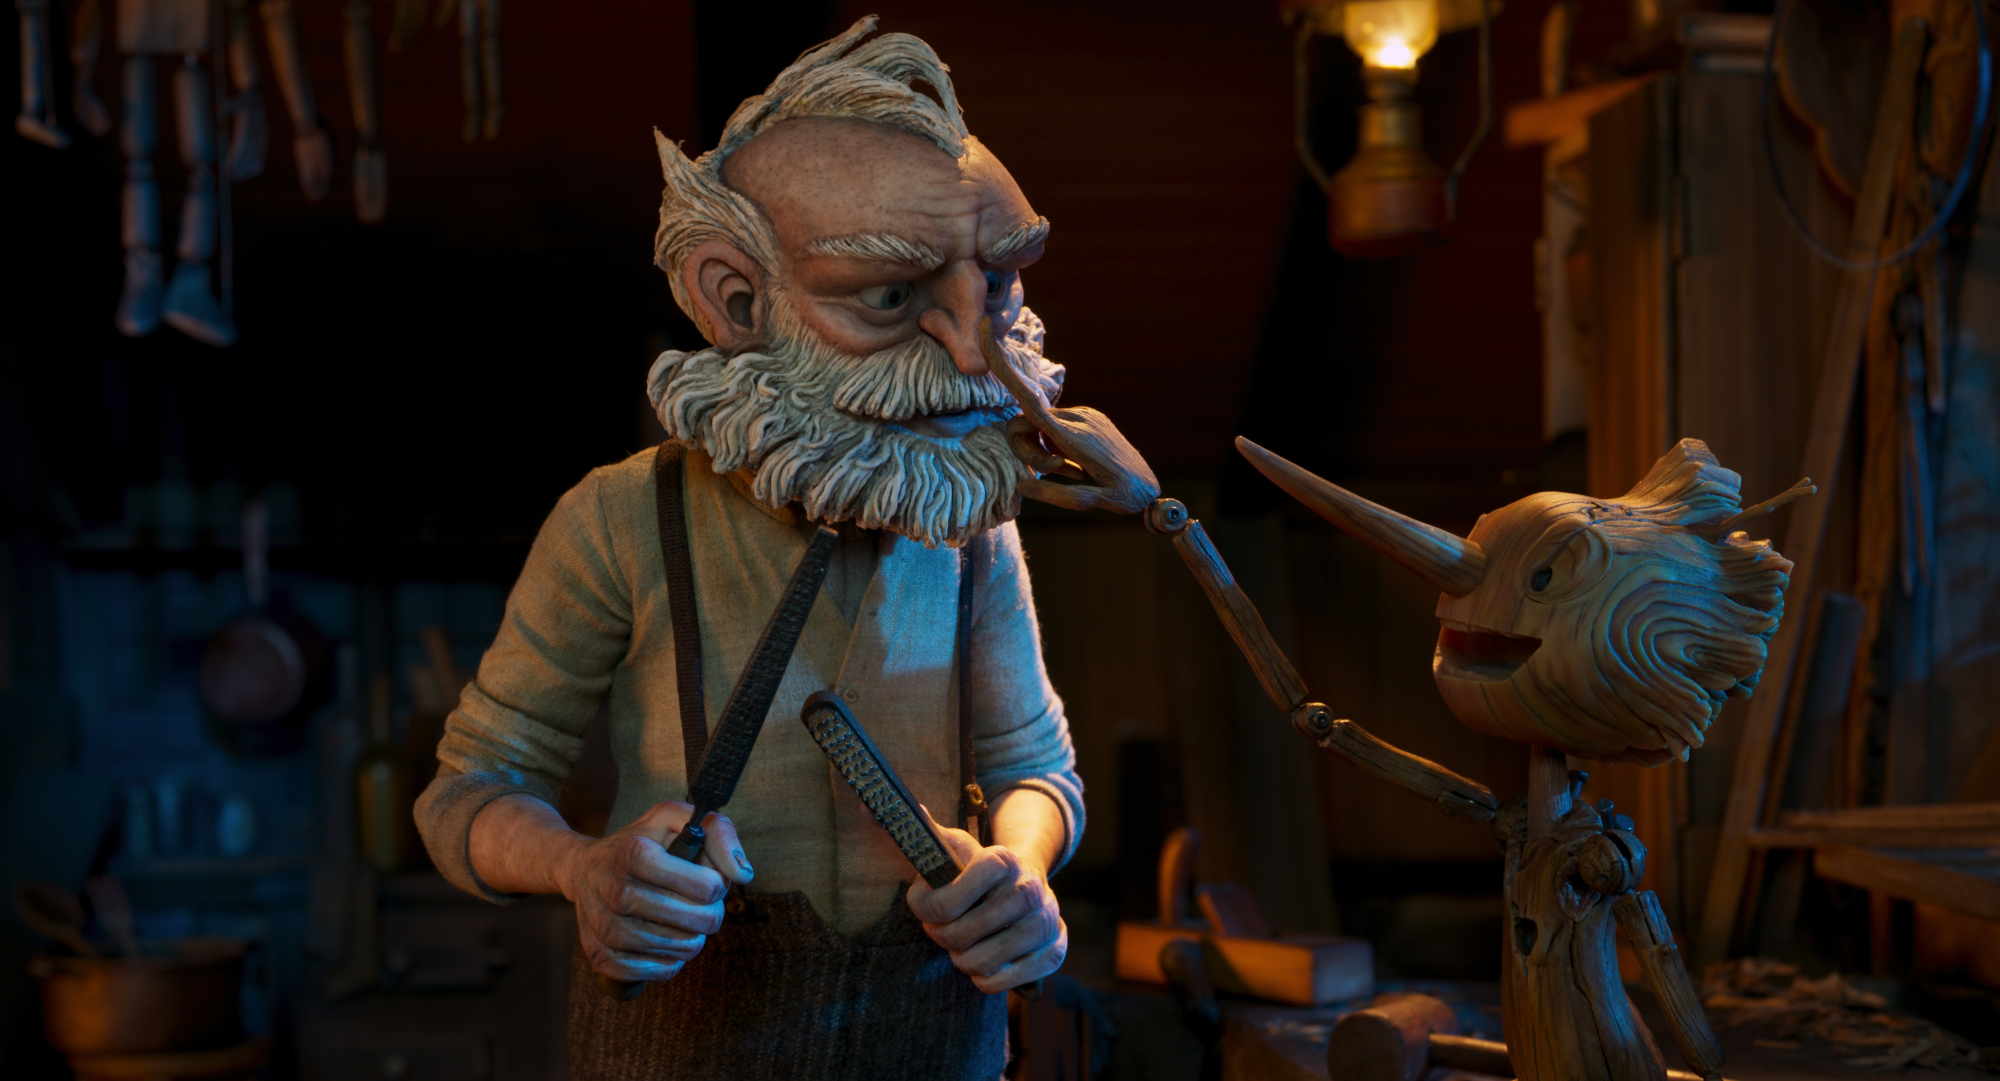 'Guillermo del Toro's Pinocchio' Gepetto (voiced by David Bradley) and Pinocchio (voiced by Gregory Mann). Pinocchio is pointing his finger at Gepetto's nose.